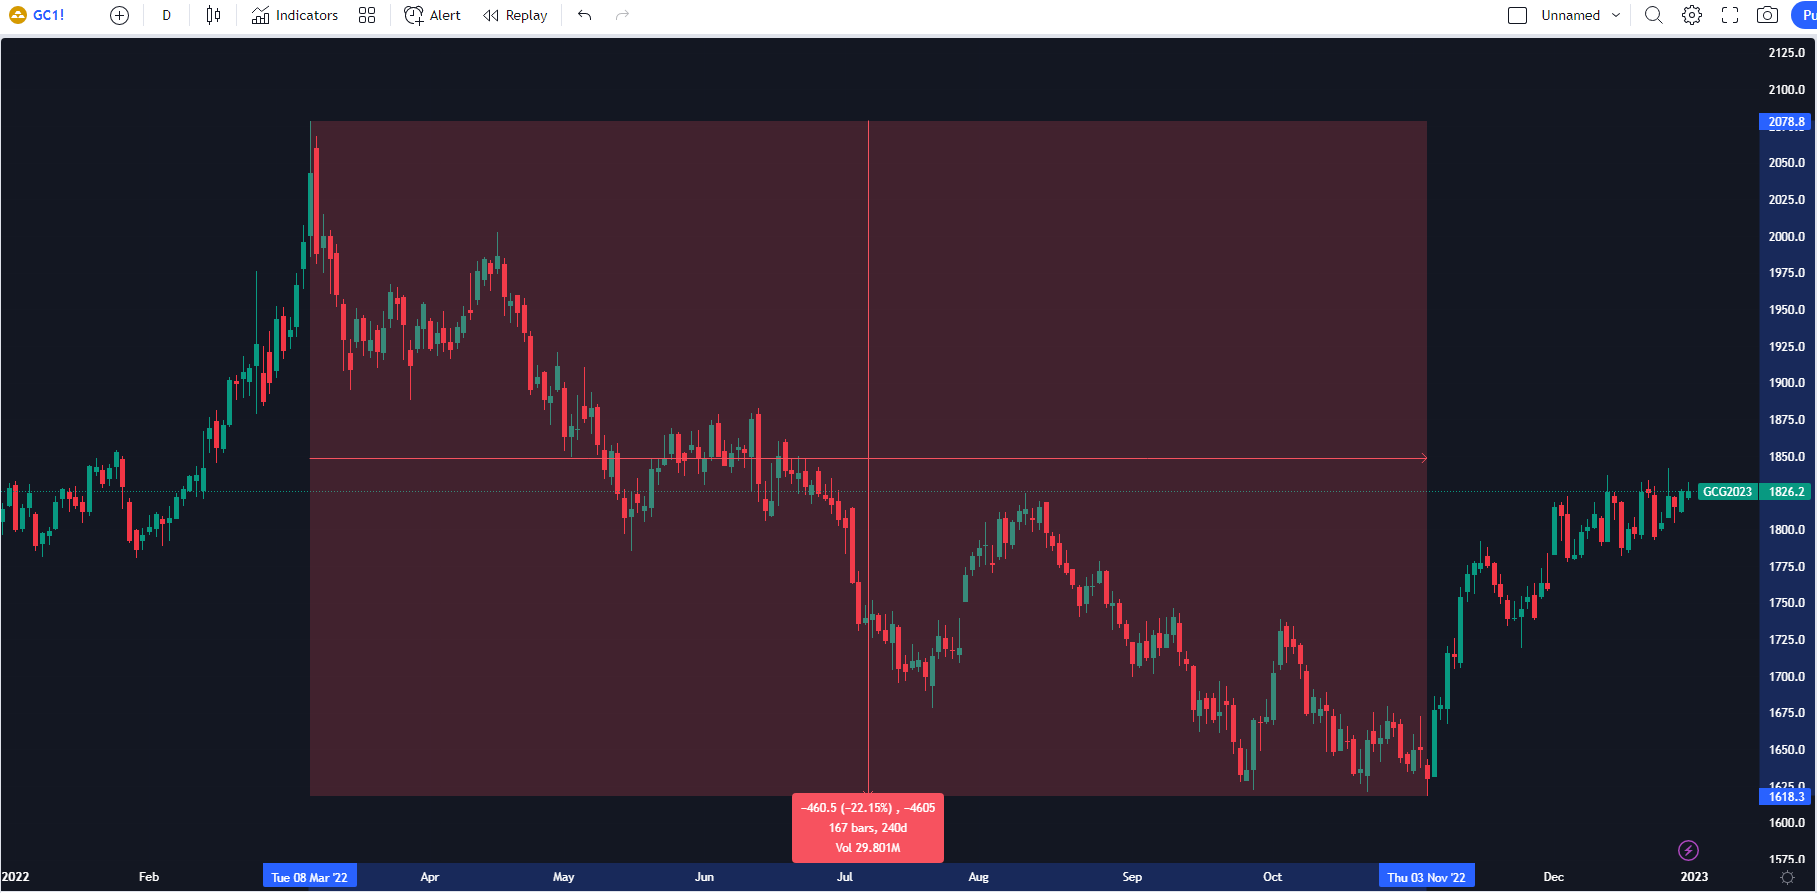 The daily chart of GC (Gold Futures), Volatility in 2022. Source: tradingview.com